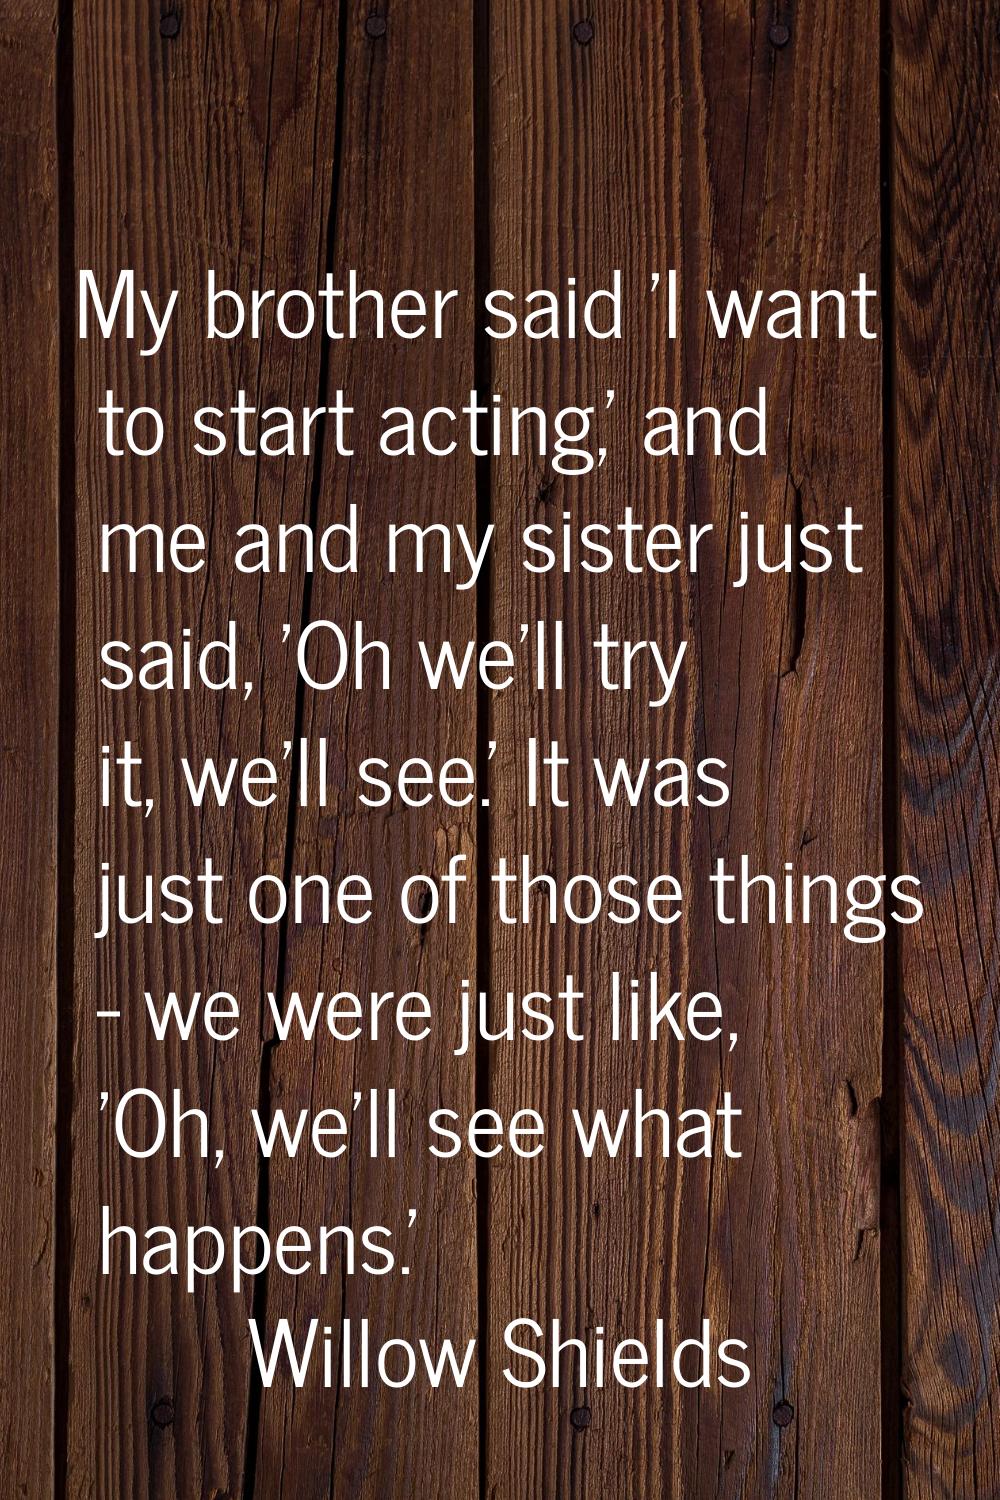 My brother said 'I want to start acting,' and me and my sister just said, 'Oh we'll try it, we'll s